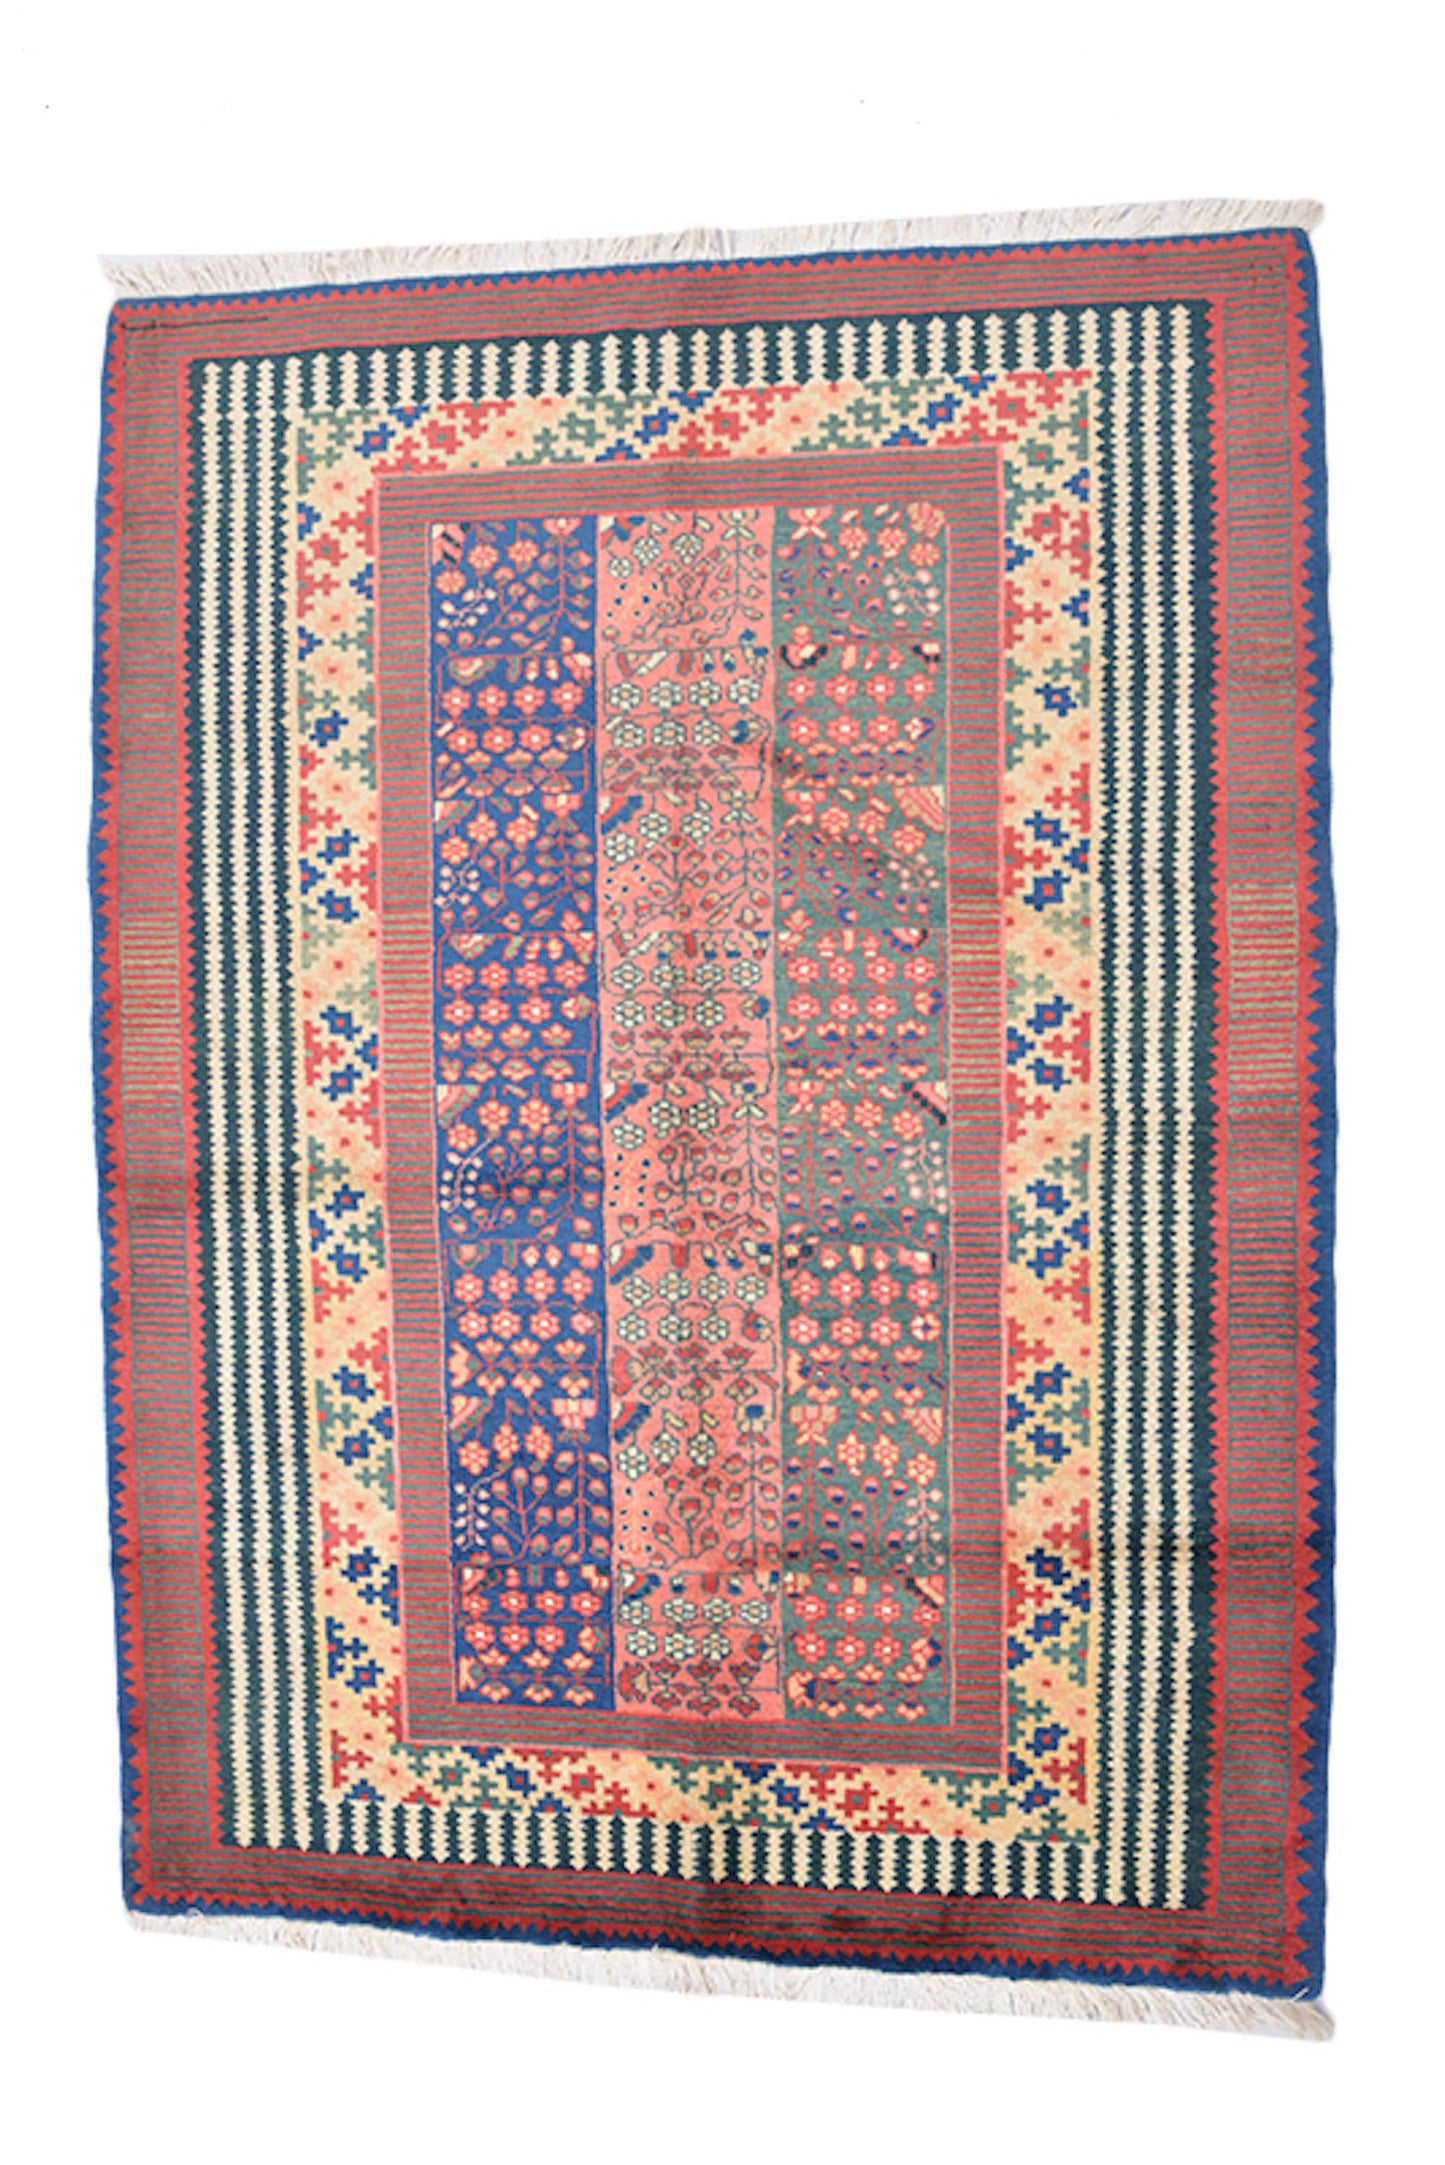 Vintage Colorful 5x7 Area Rug With Lined Pattern Tribal and Geometric Designs | Hand Knotted Wool Antique Rug